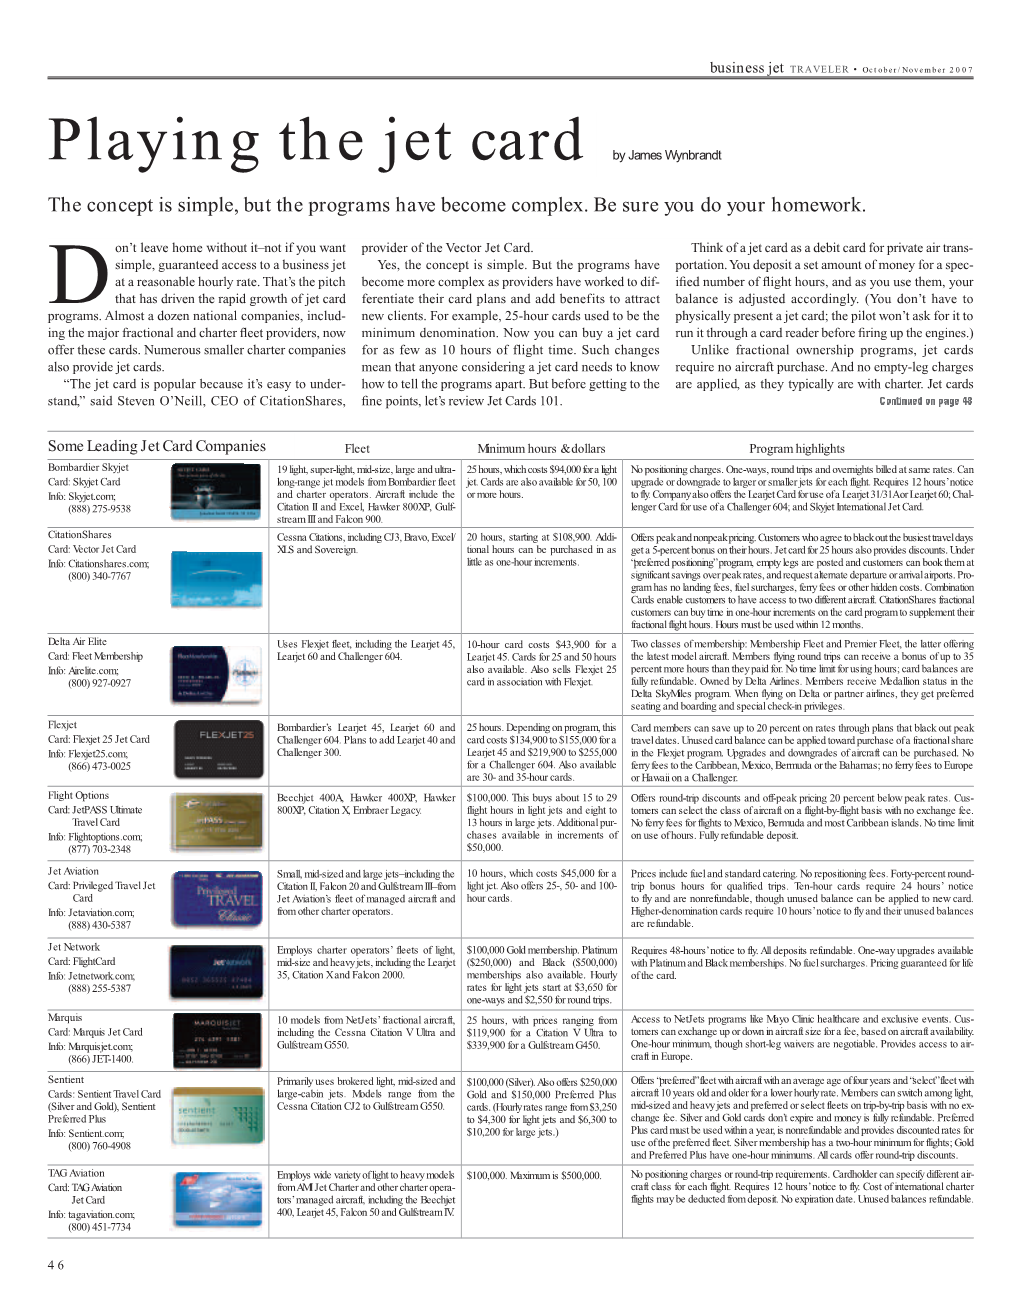 Playing the Jet Card by James Wynbrandt the Concept Is Simple, but the Programs Have Become Complex